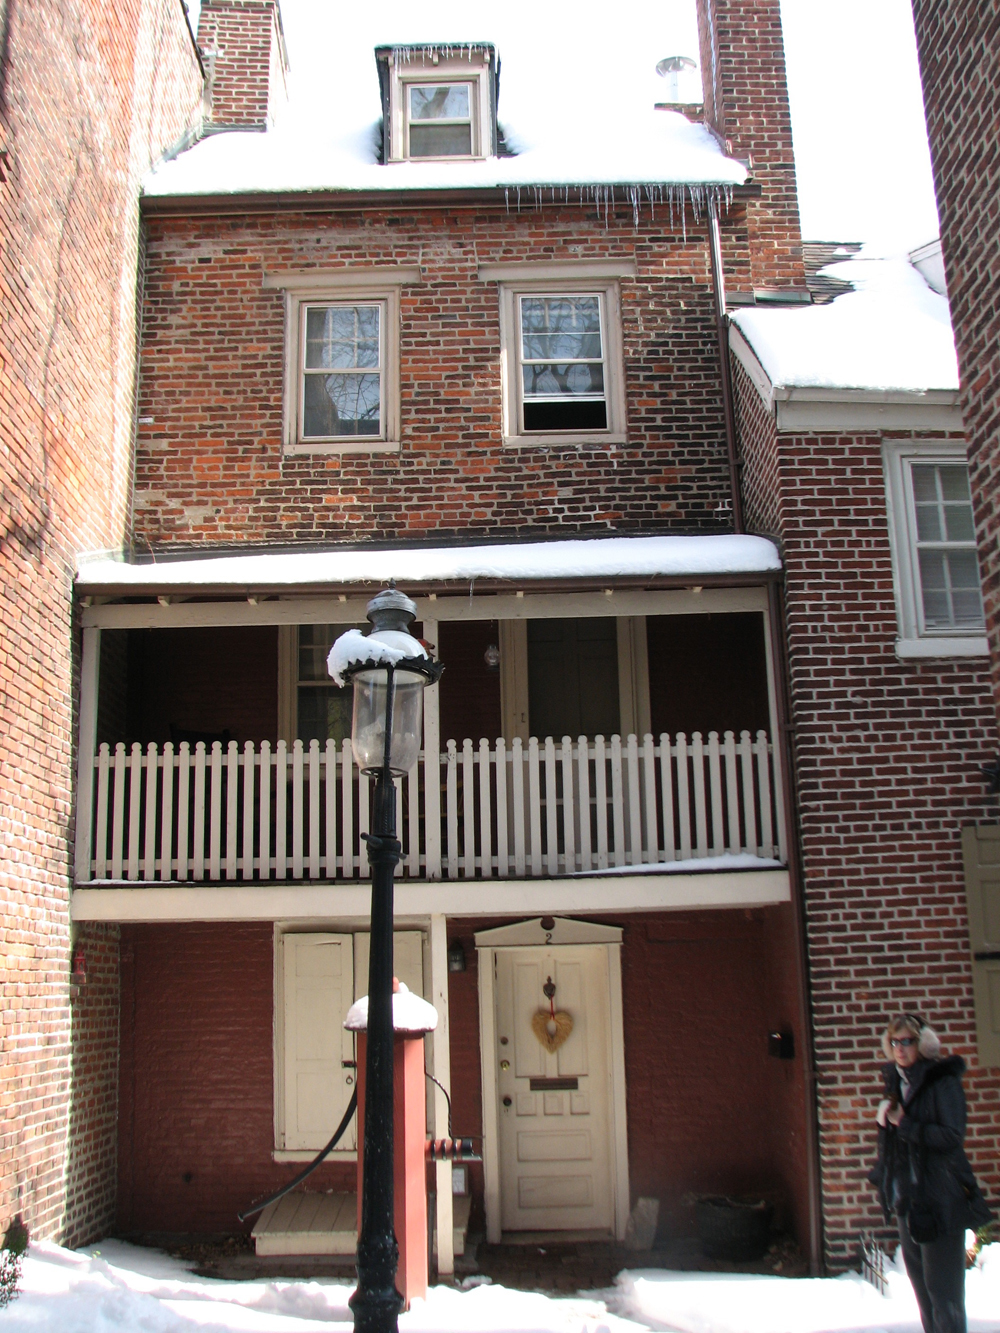 Bladen's Court, a courtyard off Elfreth's Alley, once contained the public privy.